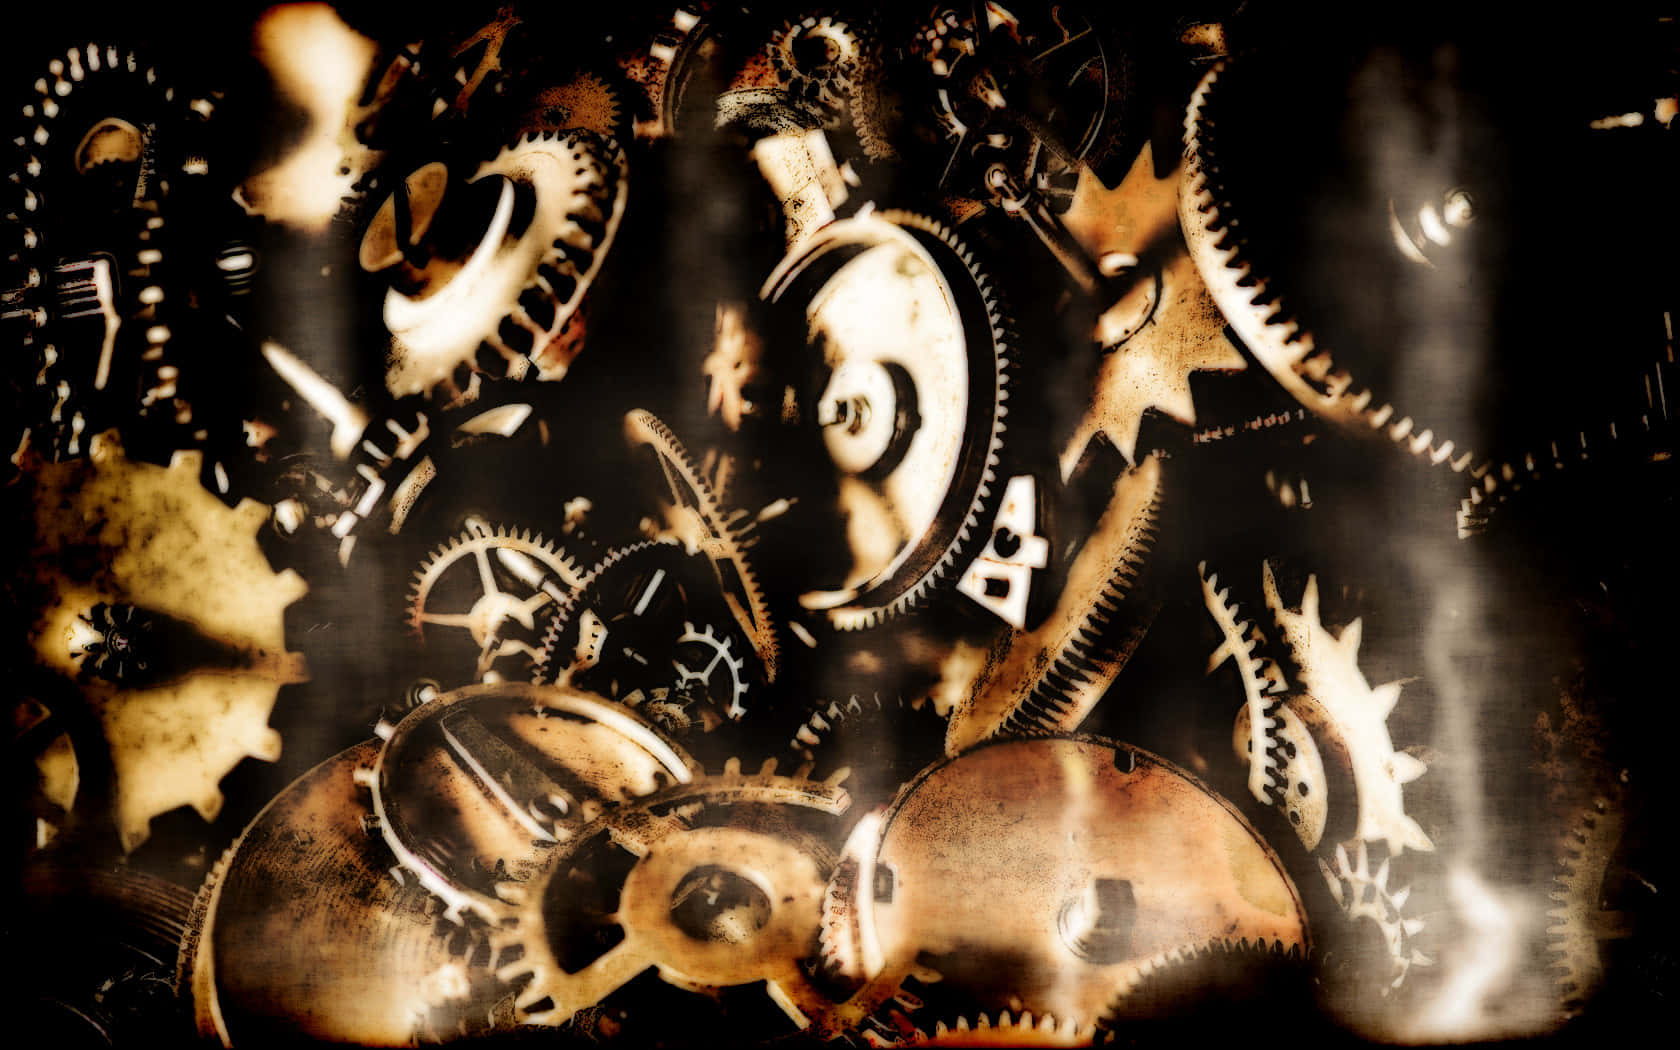 Enter a World of Fantasy, Imagination and Exploration With Steampunk